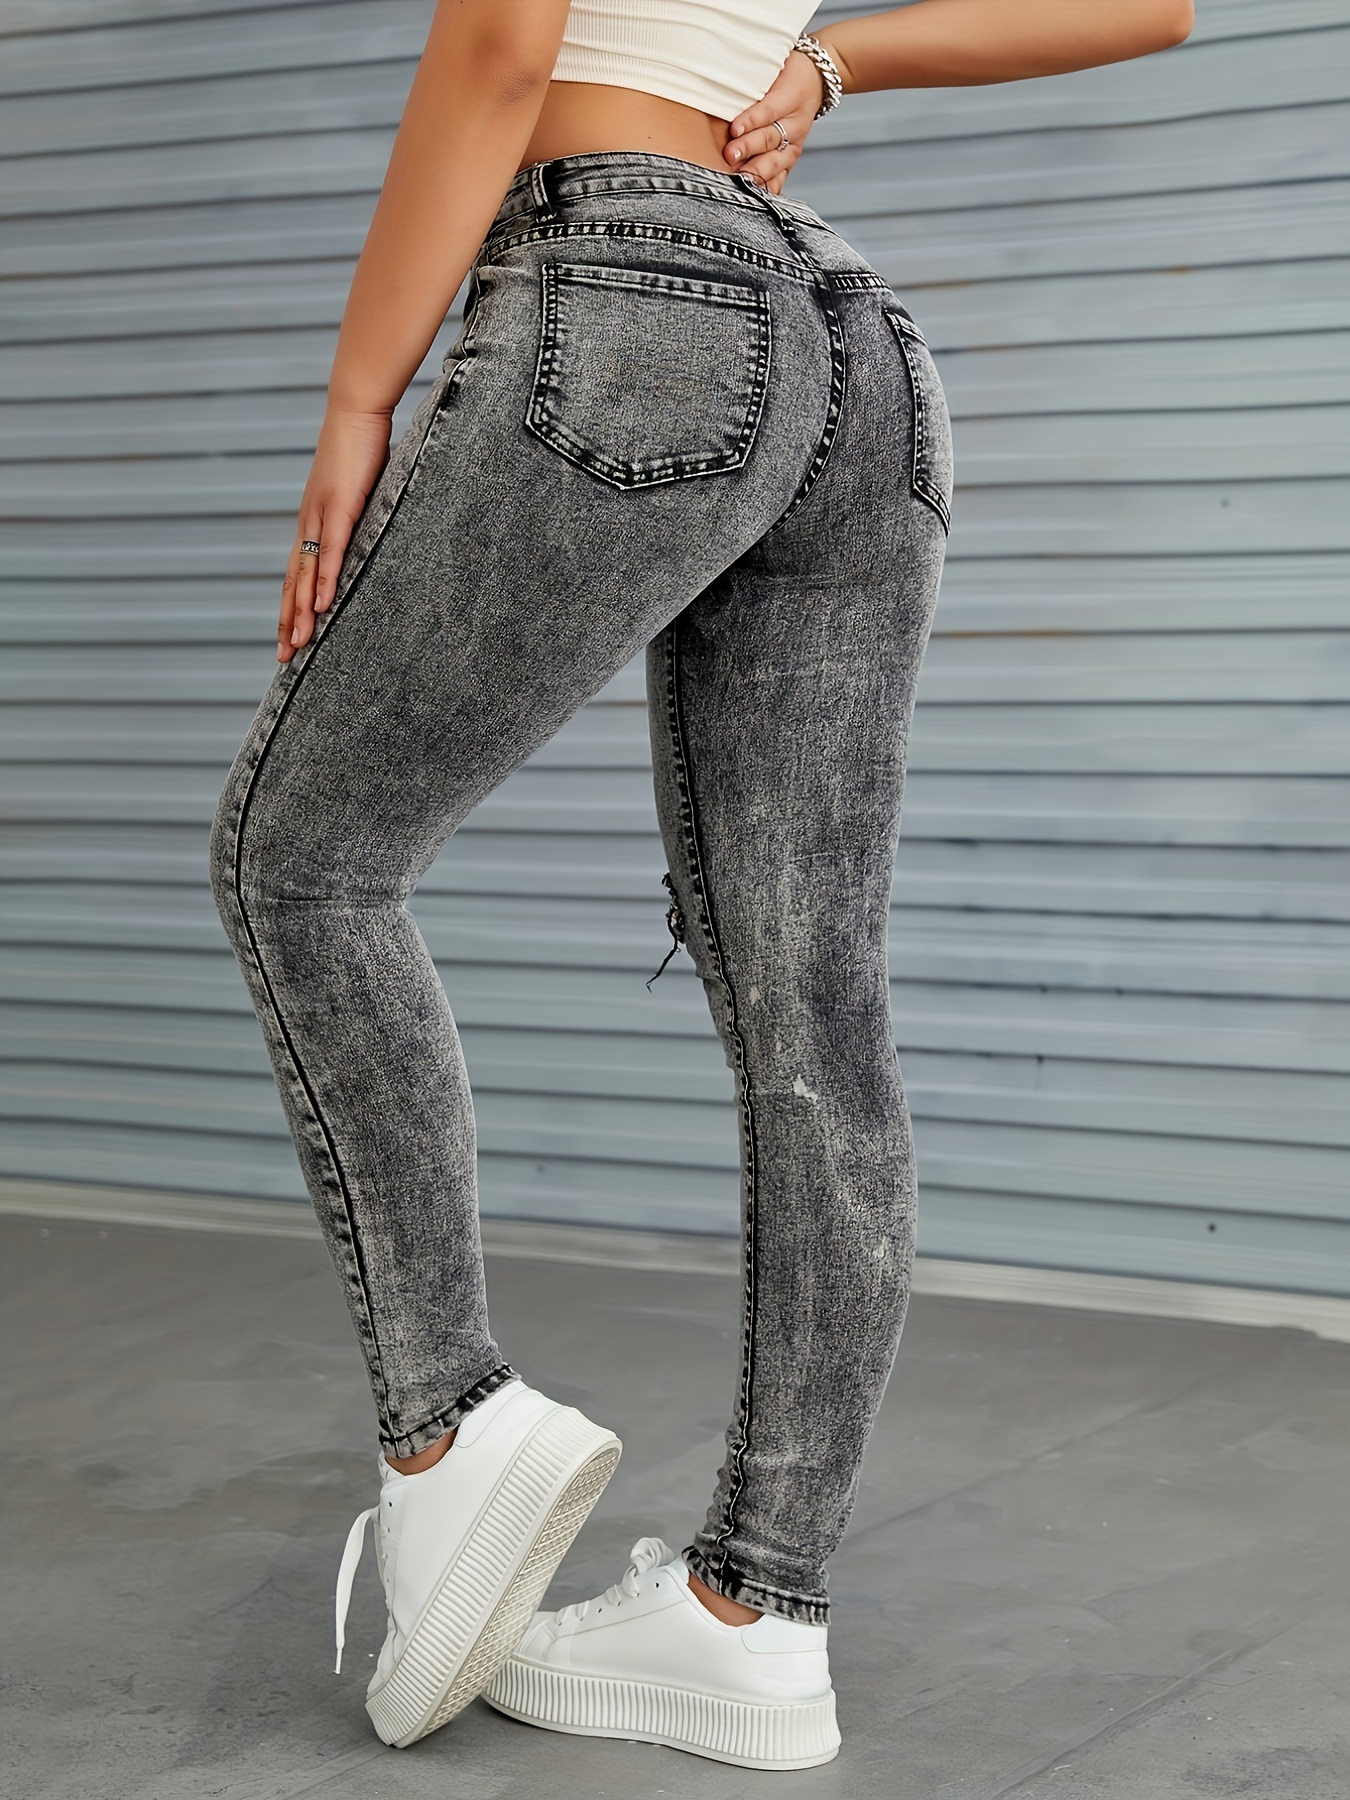 Ripped Holes Washed Skinny Jeans, Slim Fit High Stretch Distressed Tight  Jeans, Women's Denim Jeans & Clothing